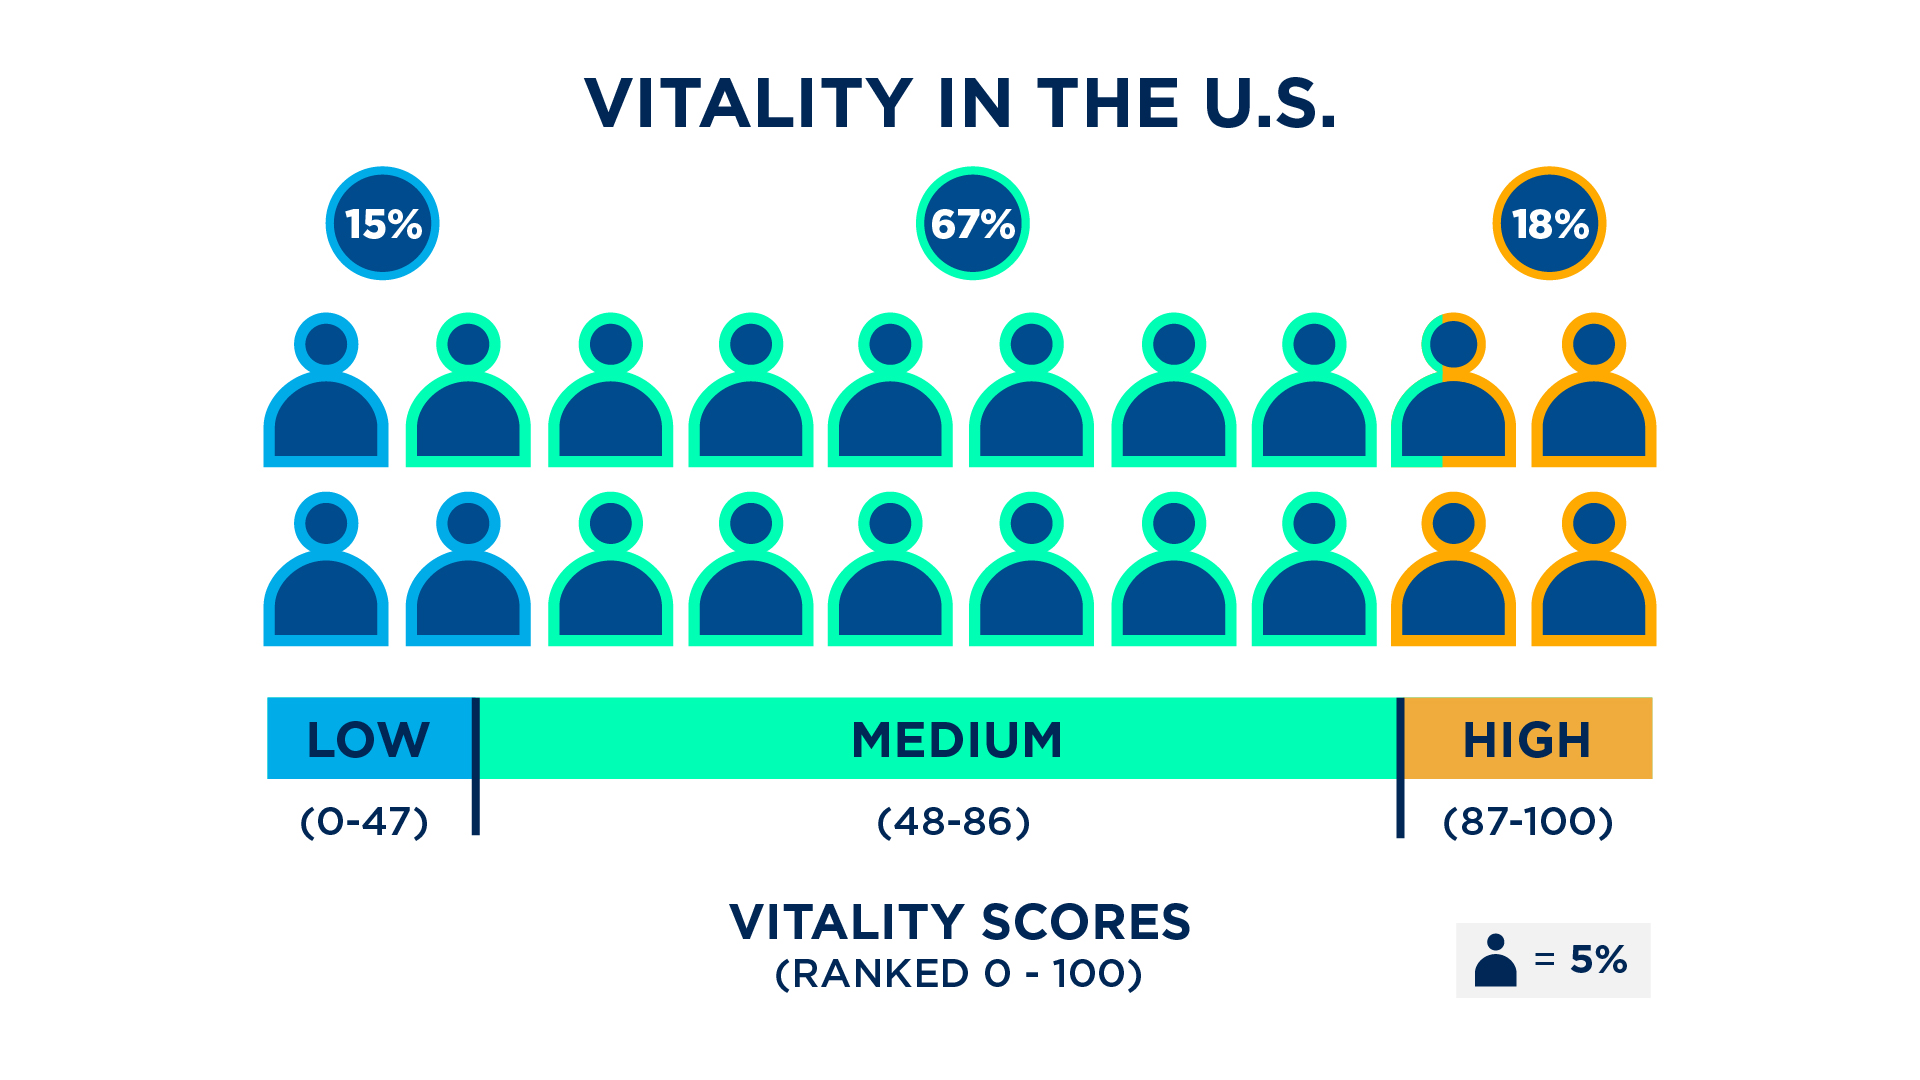 Vitality scores in the United States